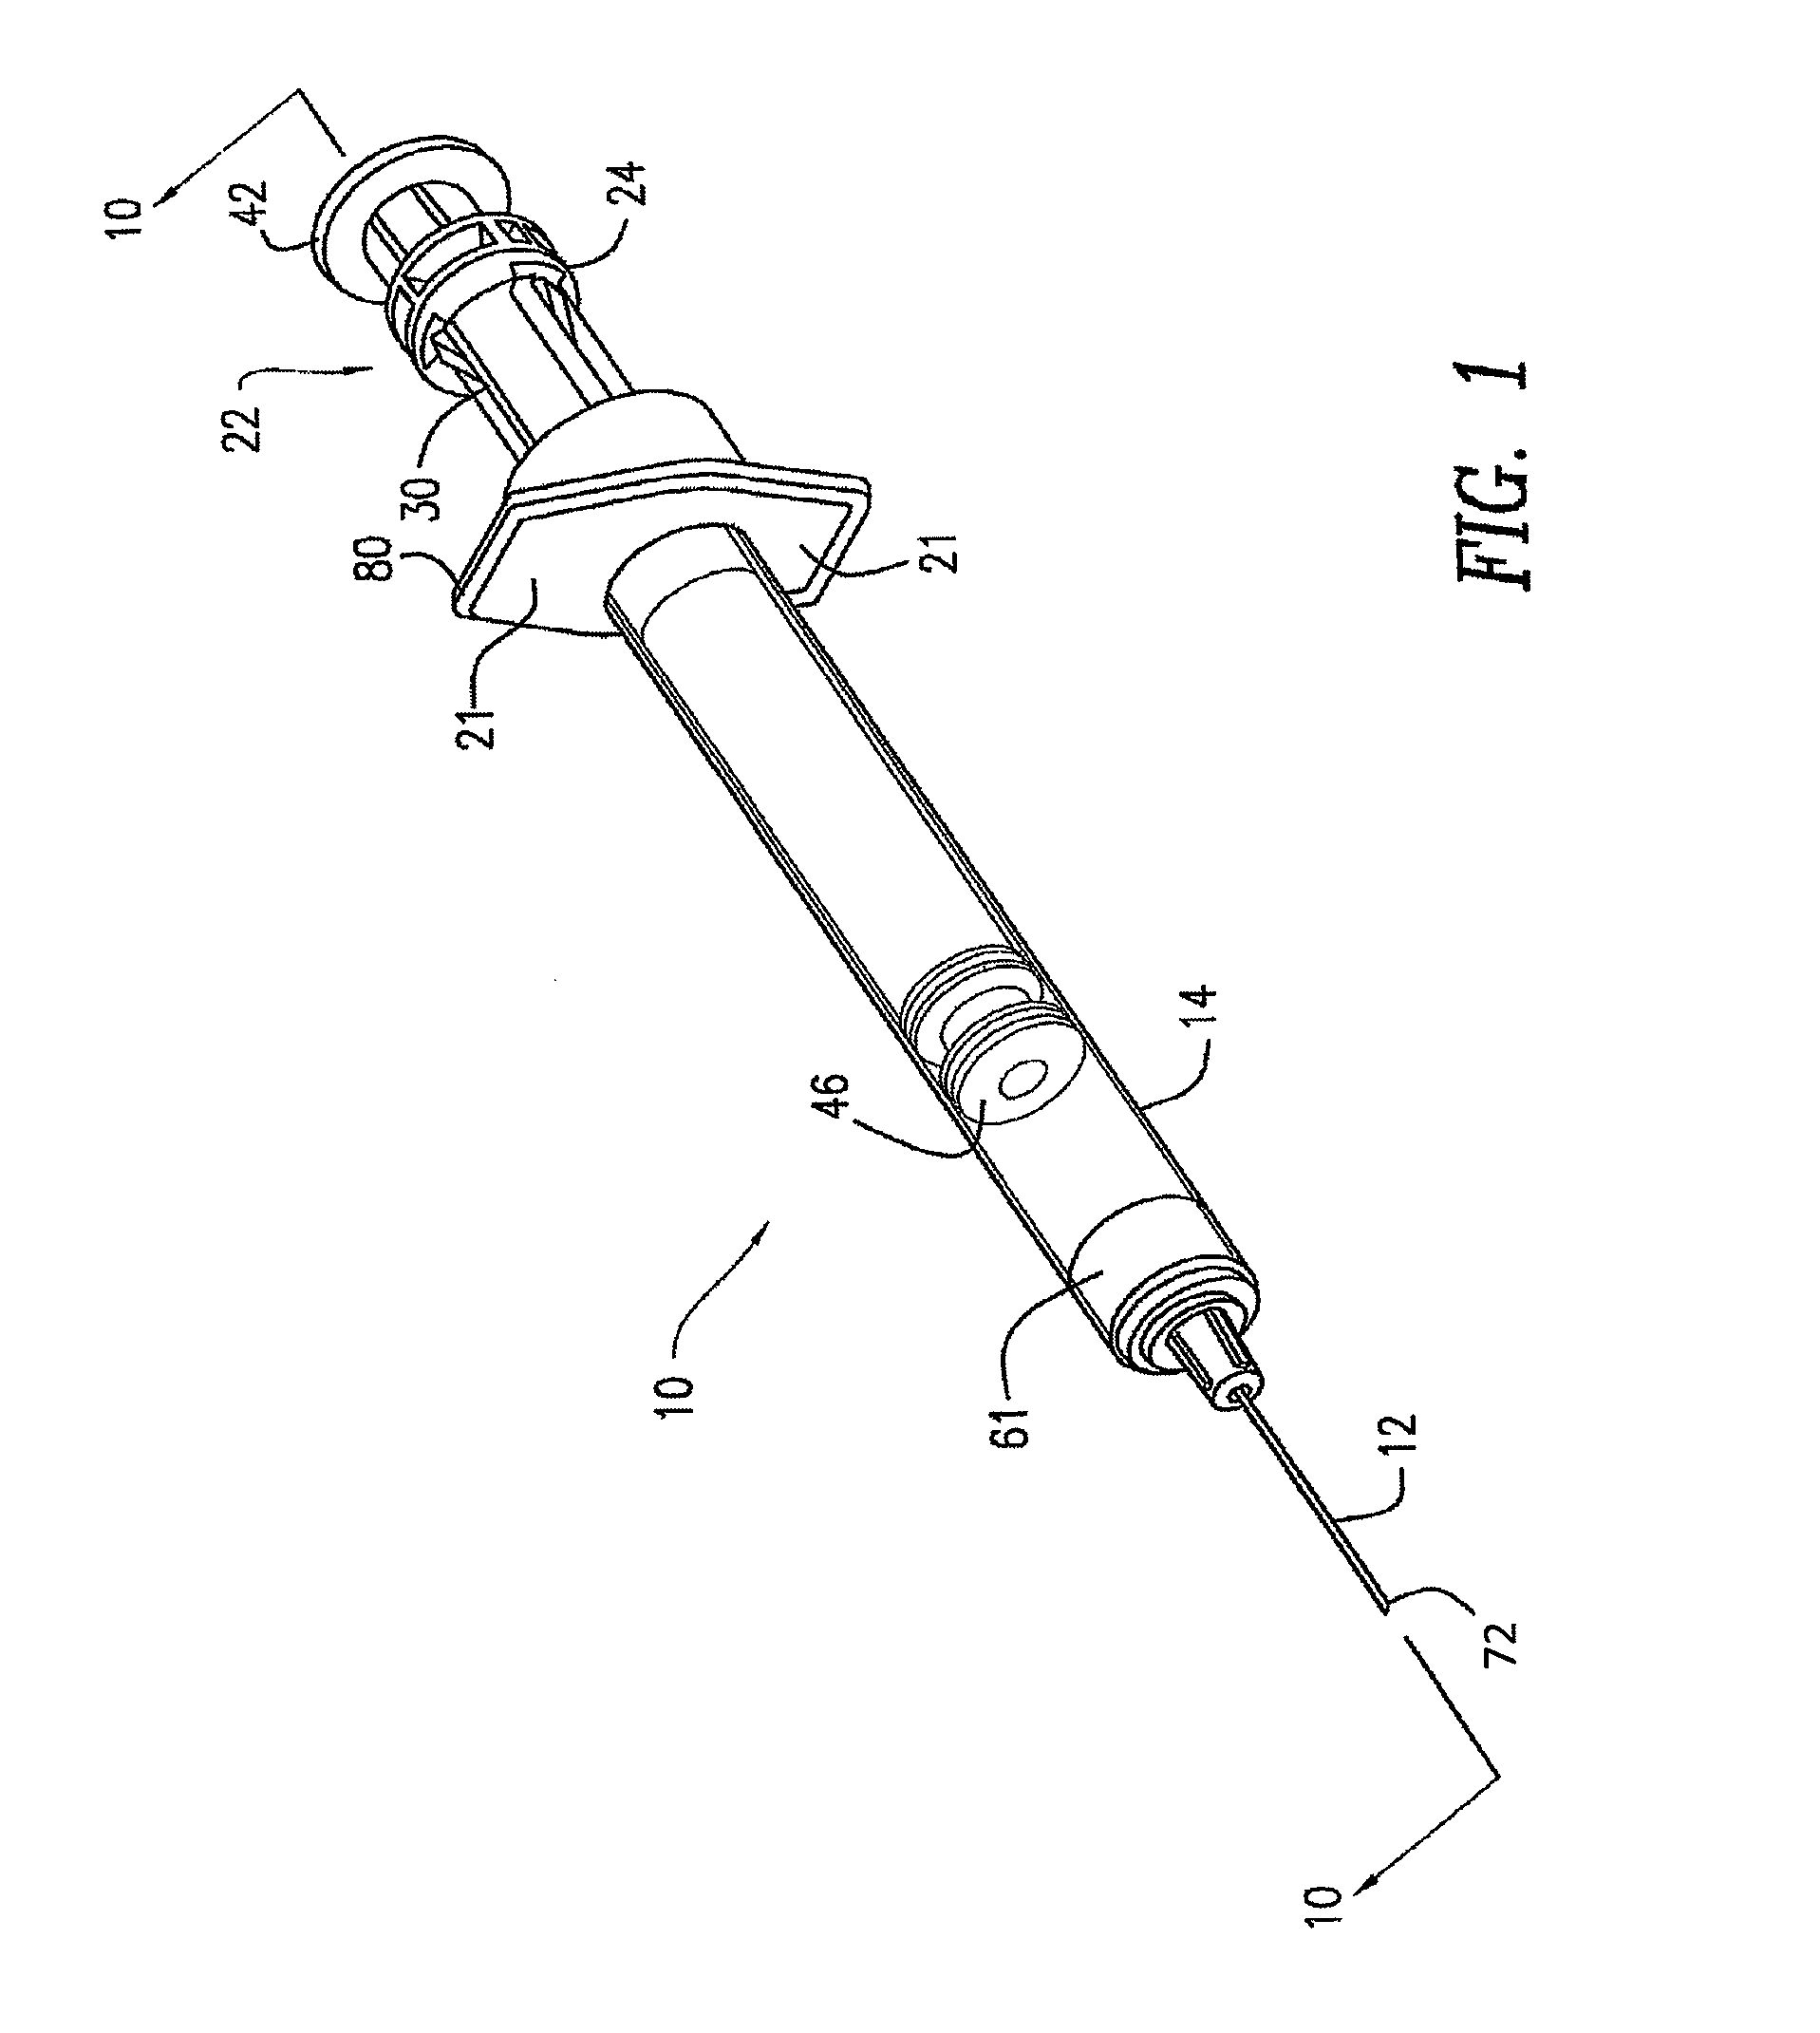 Retractable needle syringe assembly